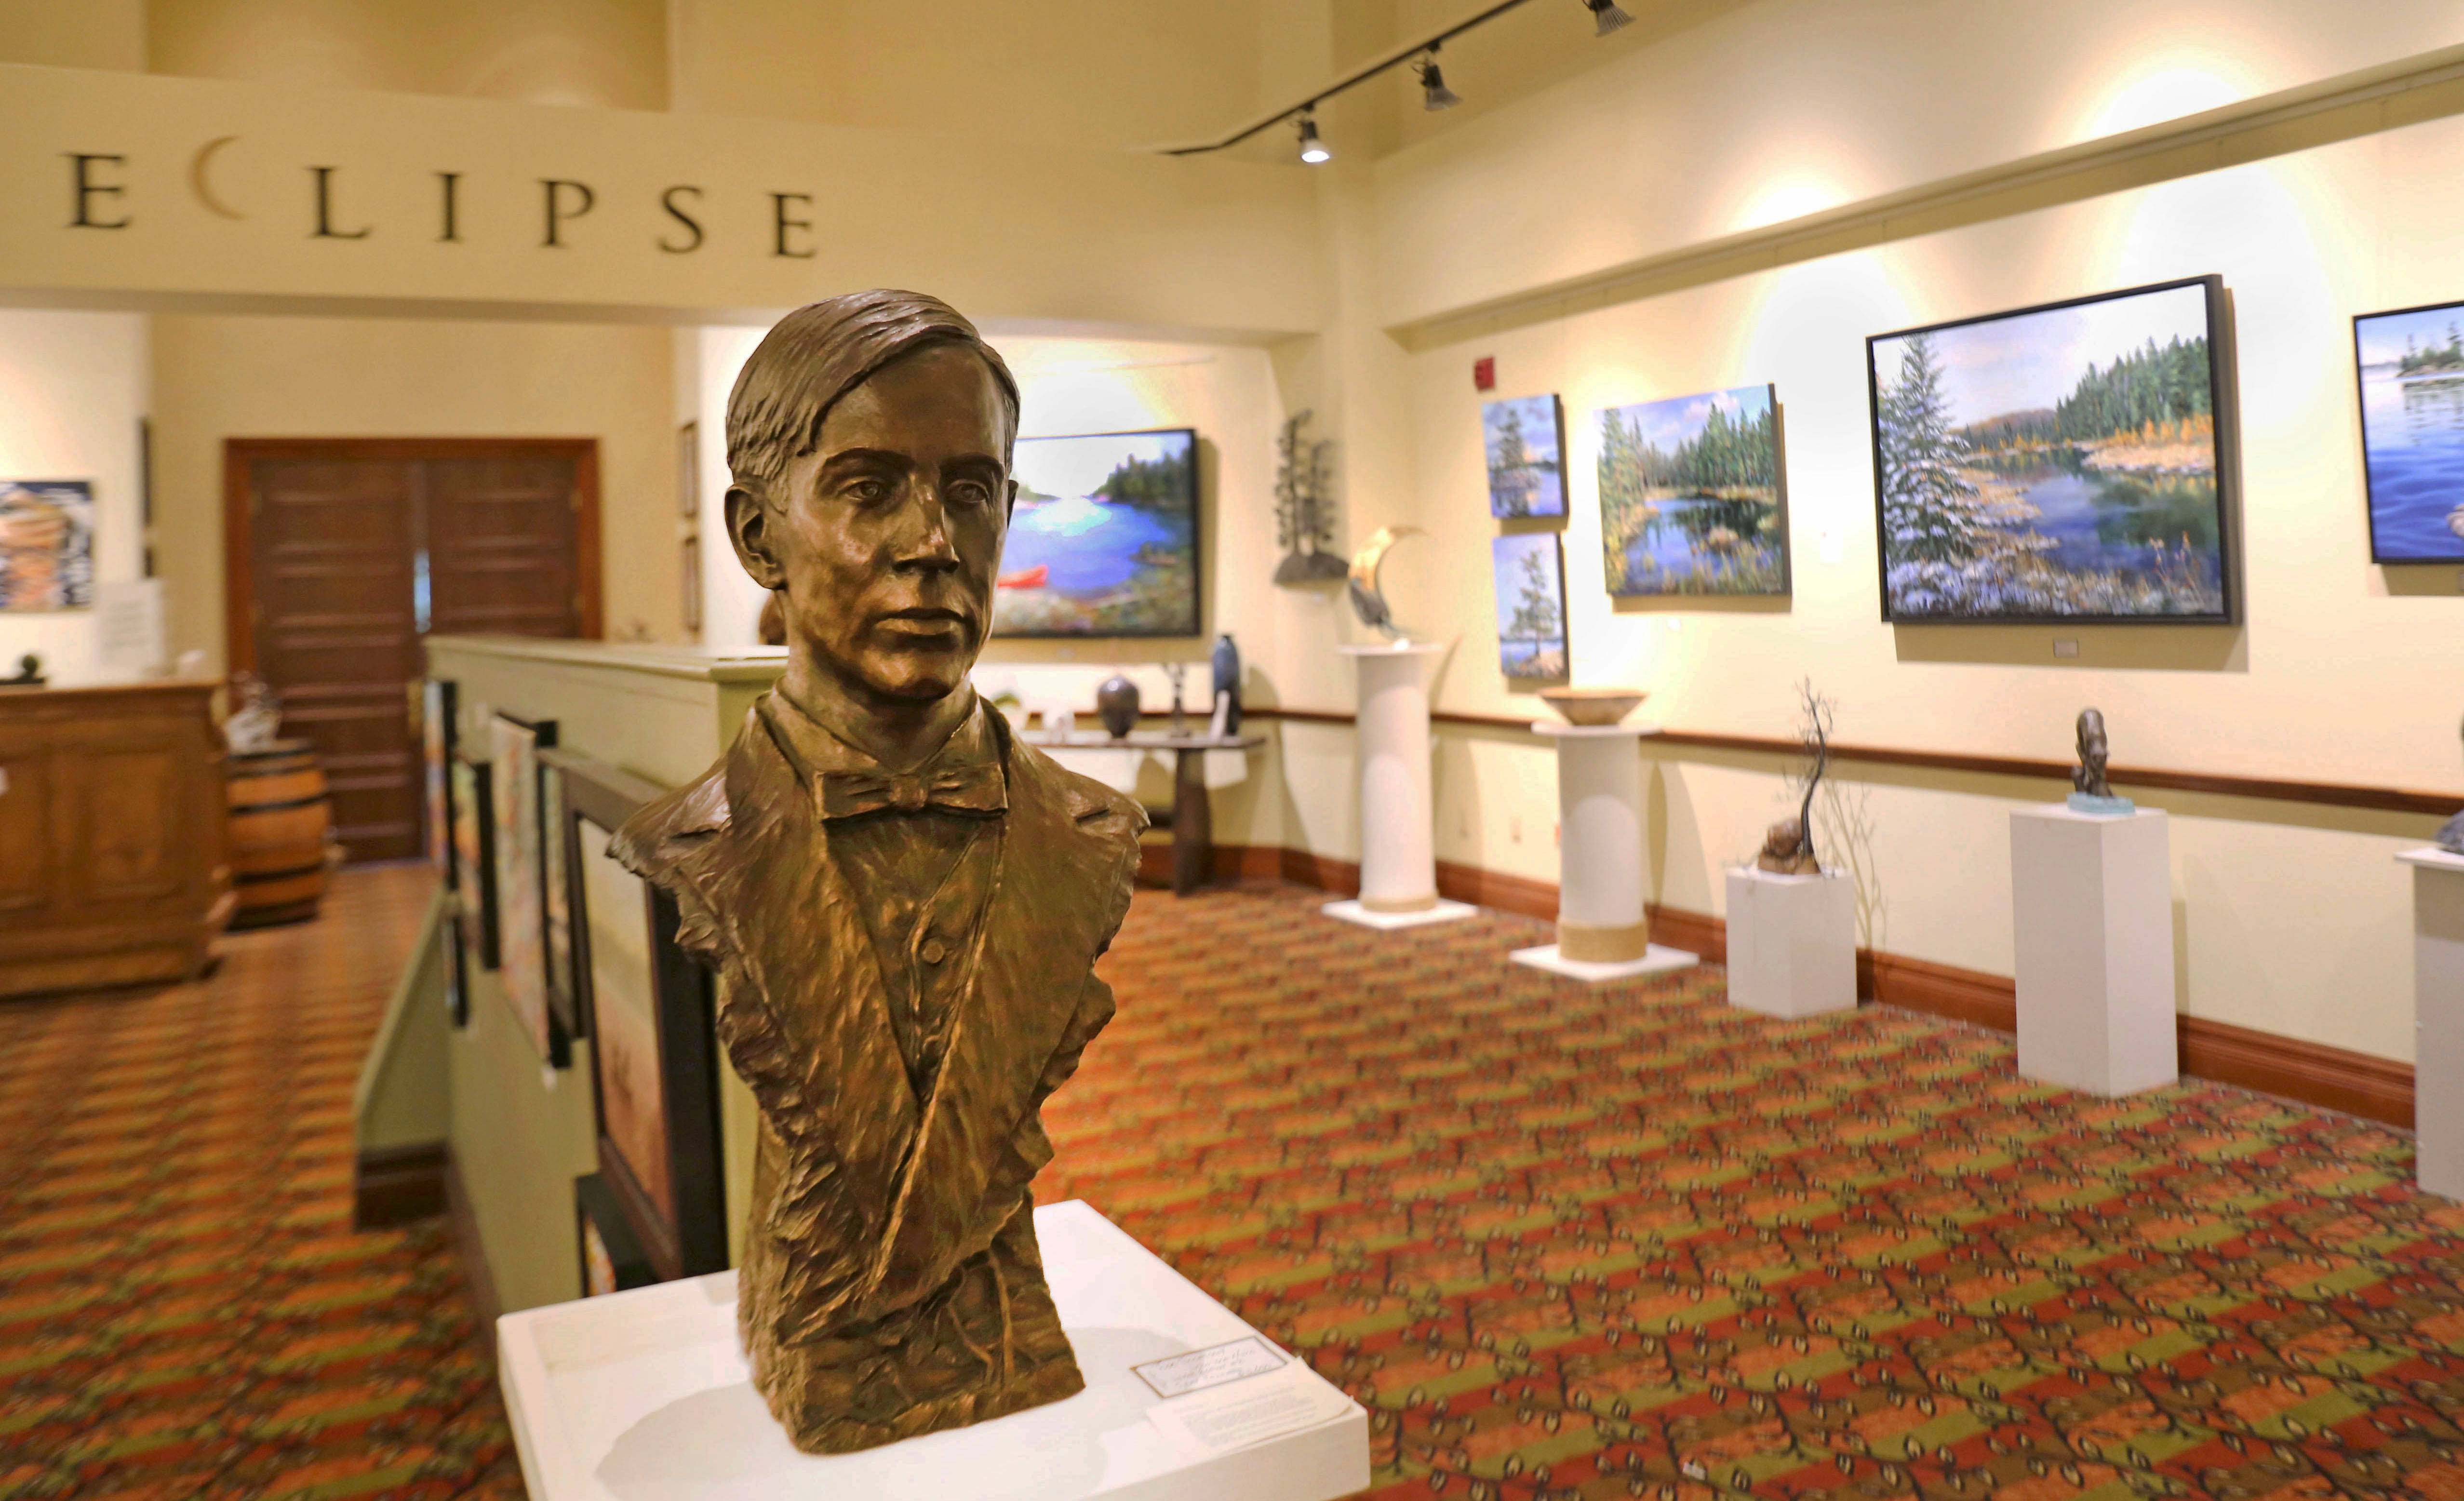 Tom Thomson sculpture greets visitors to Eclipse Art Gallery